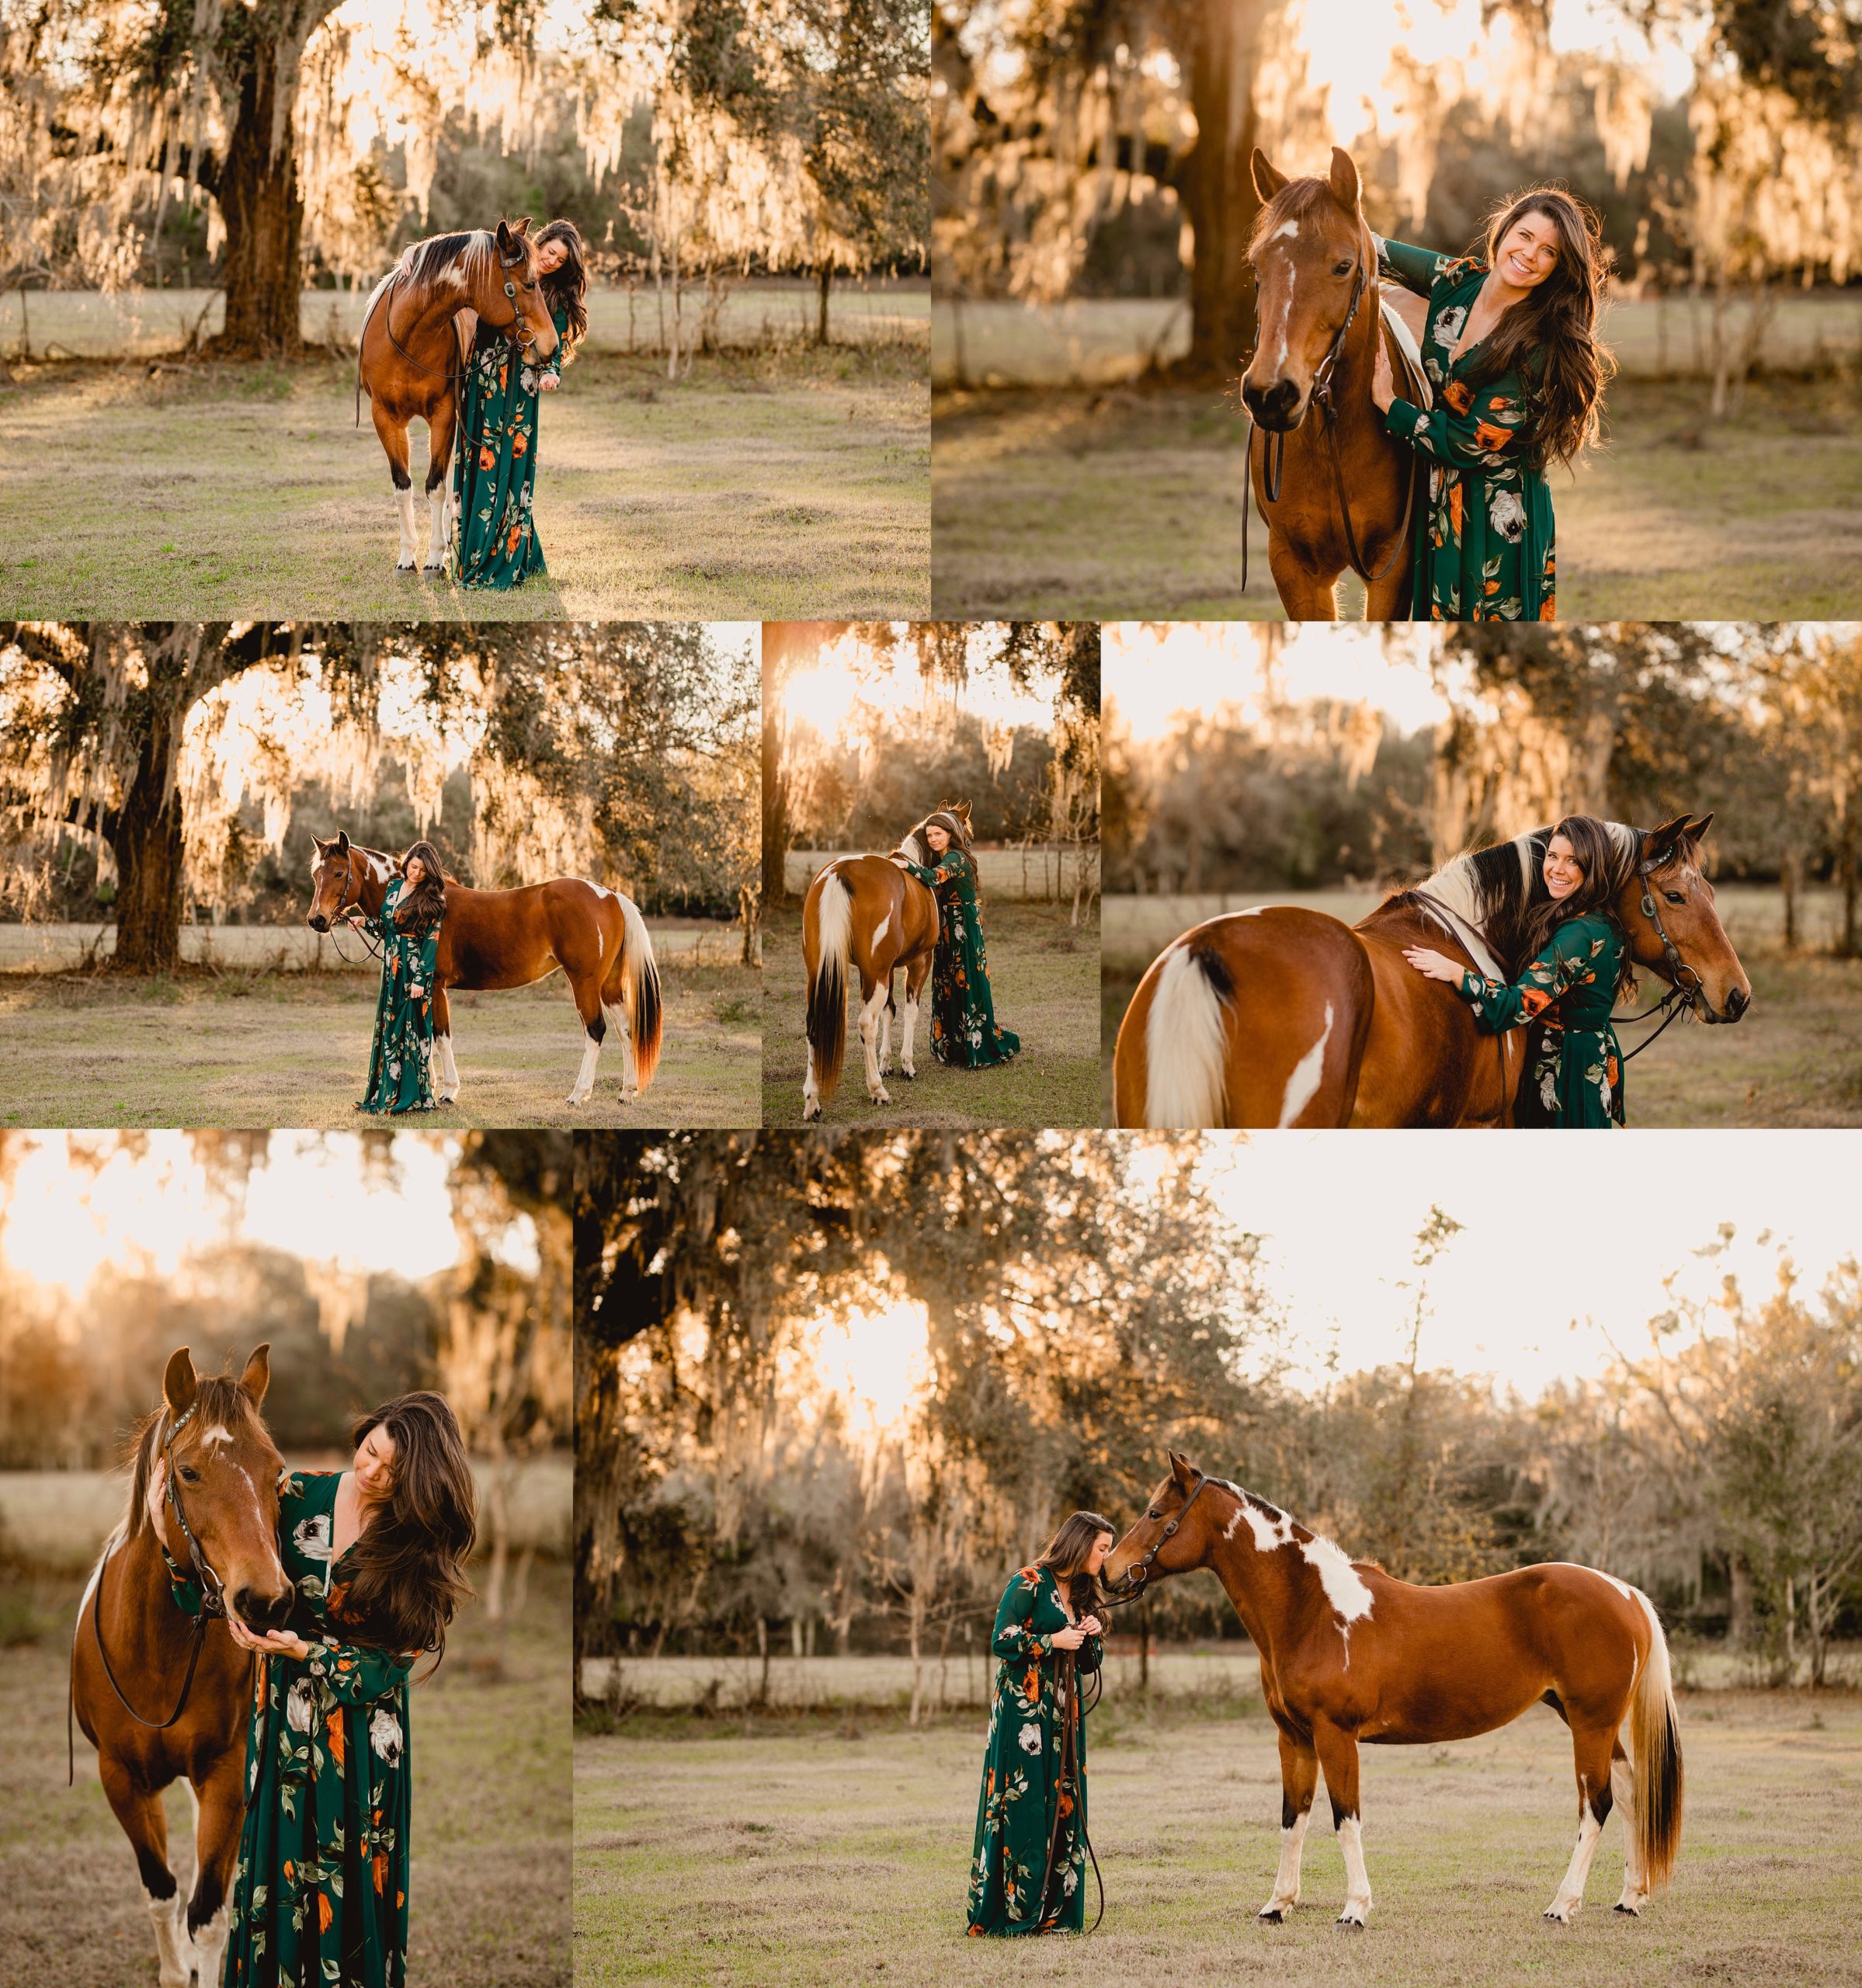 APHA mare with her rider at sunset wearing long flowy dress. Baltic born emerald green dress.